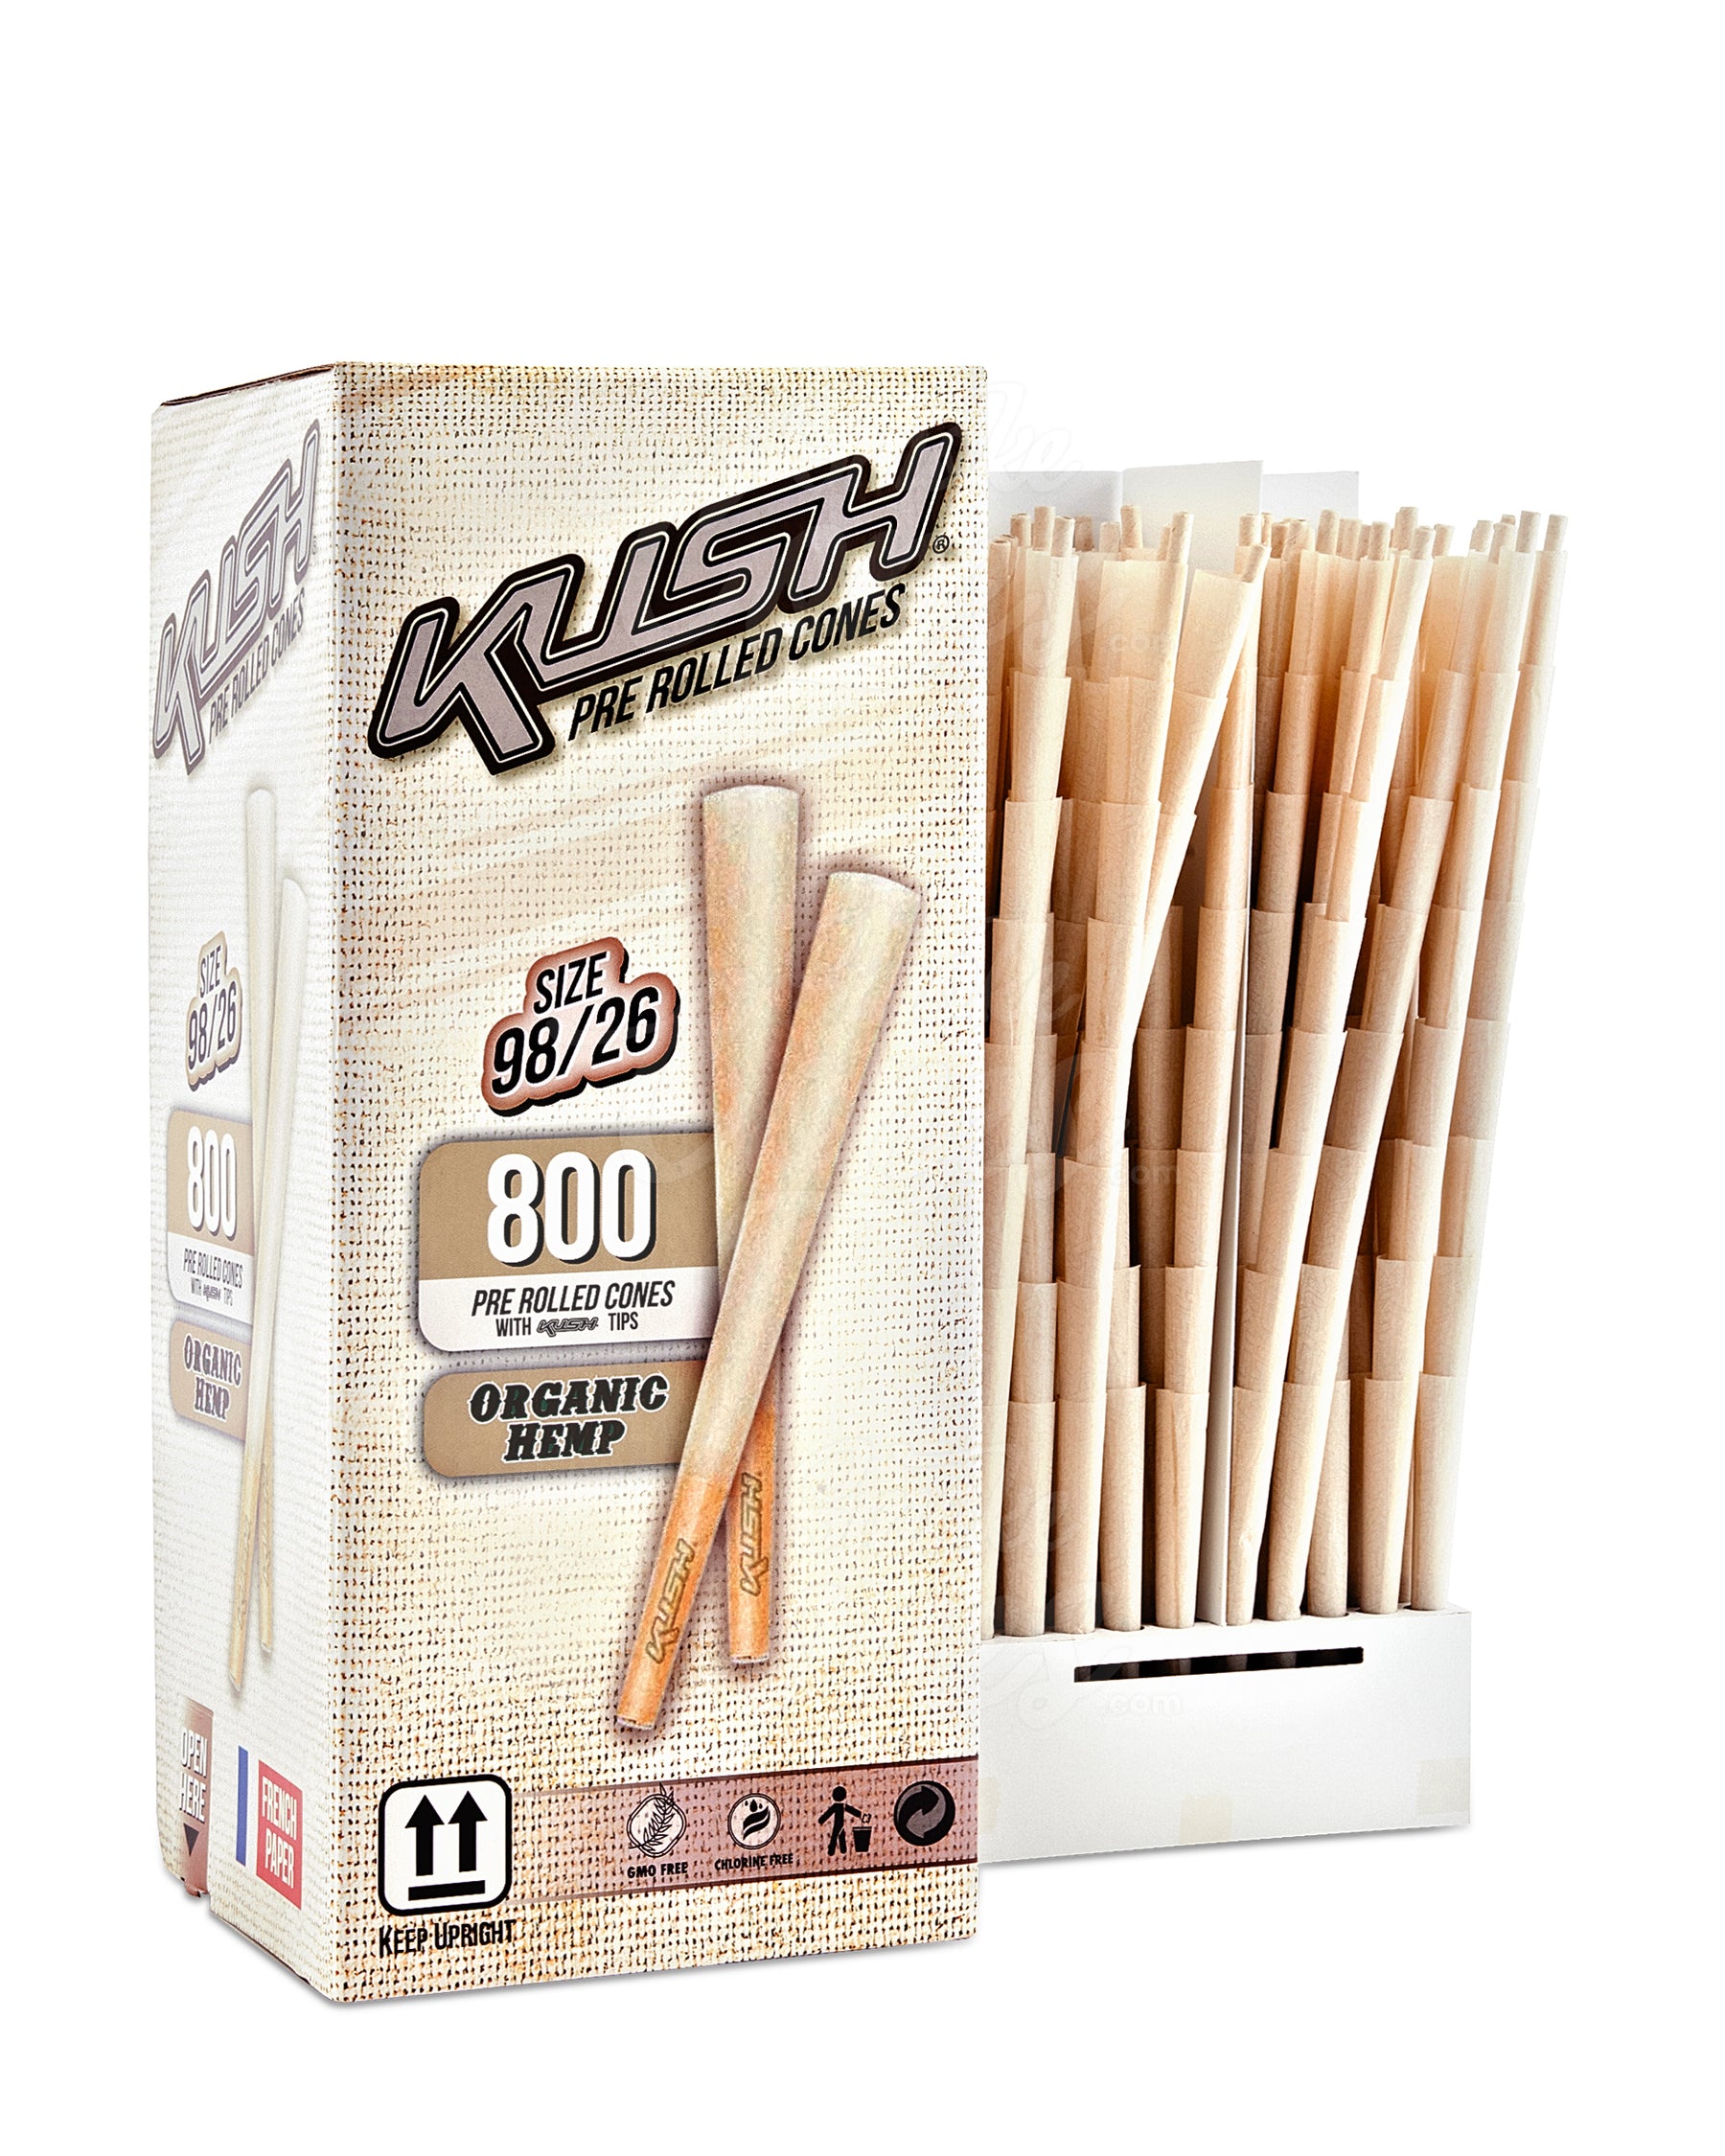 Kush 98mm Special Size Organic Hemp Pre Rolled Cones w/ Filter Tip 800/Box - 2